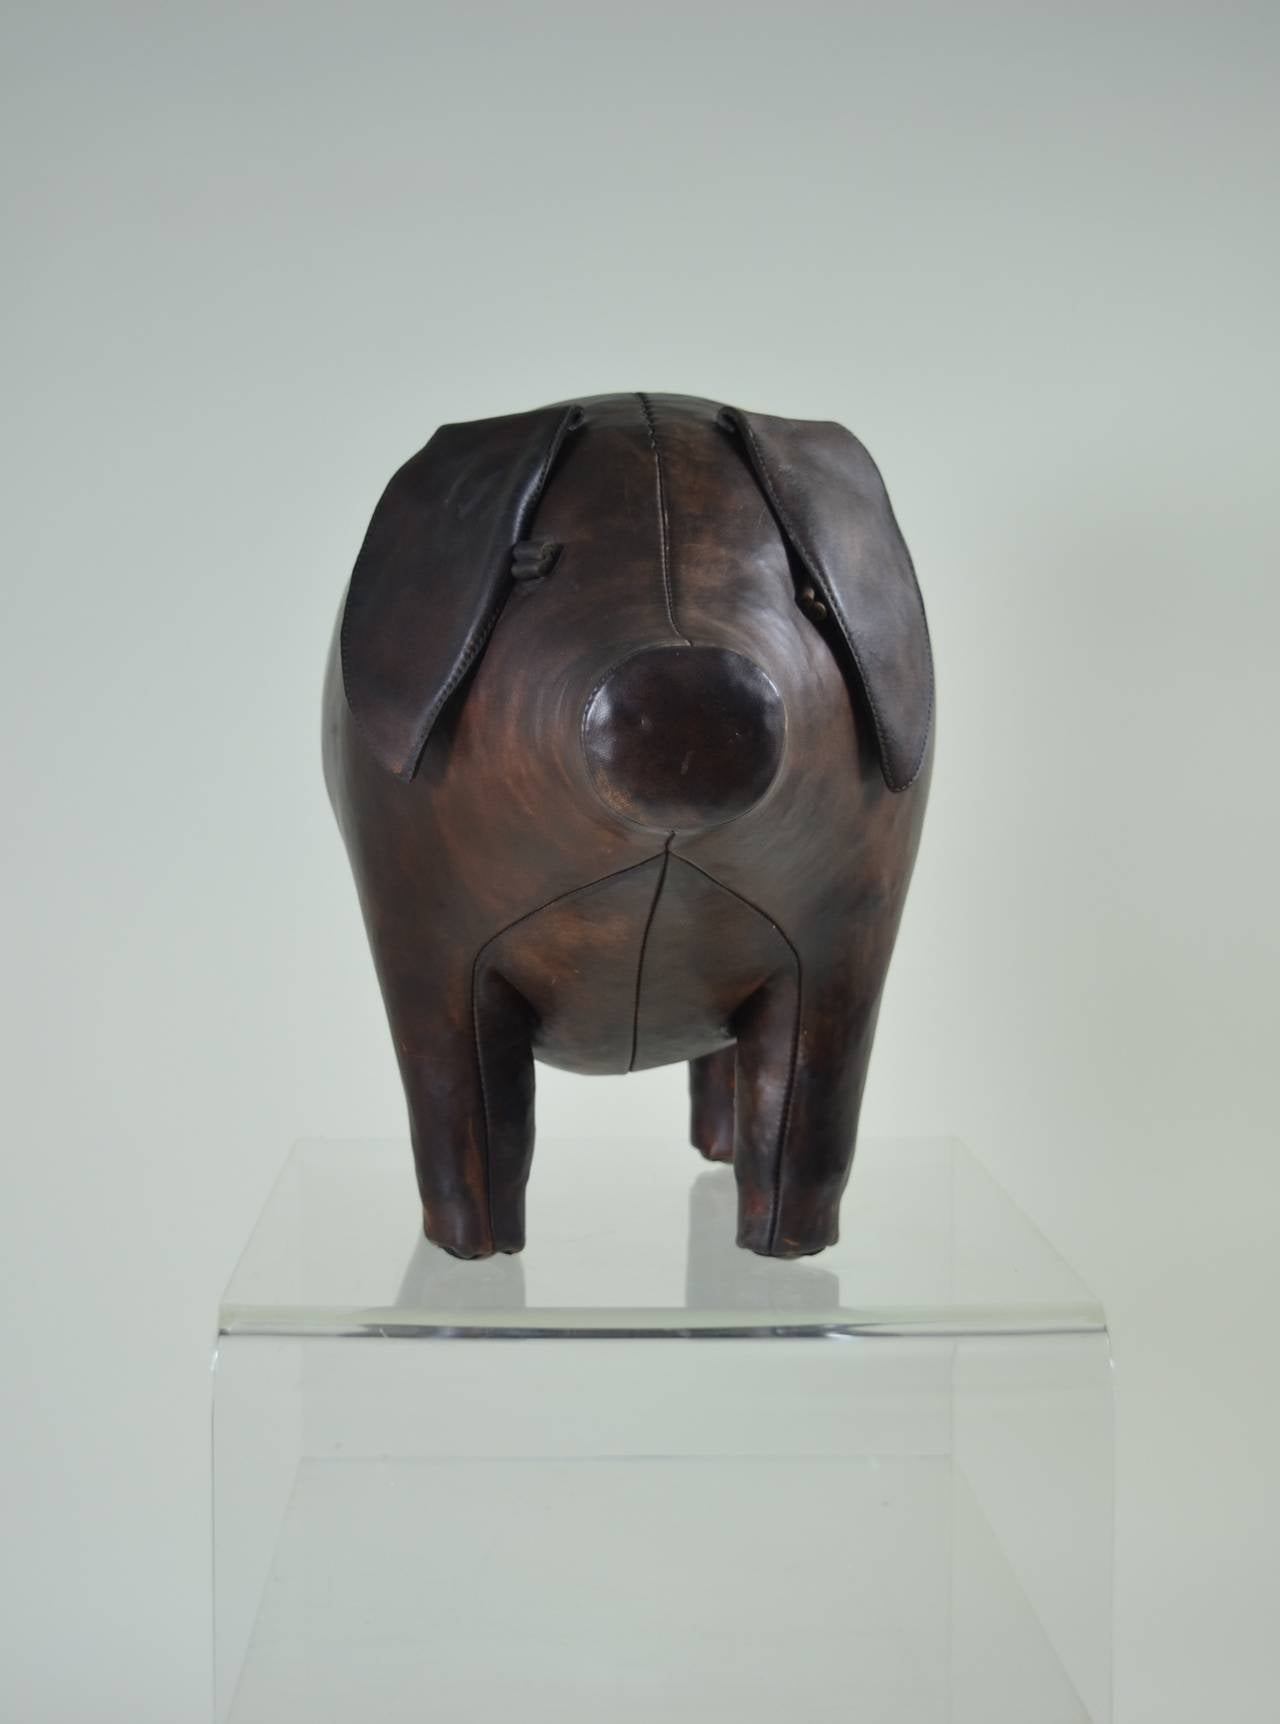 English Leather Pig Stool Made by Omersa & Company for Abercrombie & Fitch